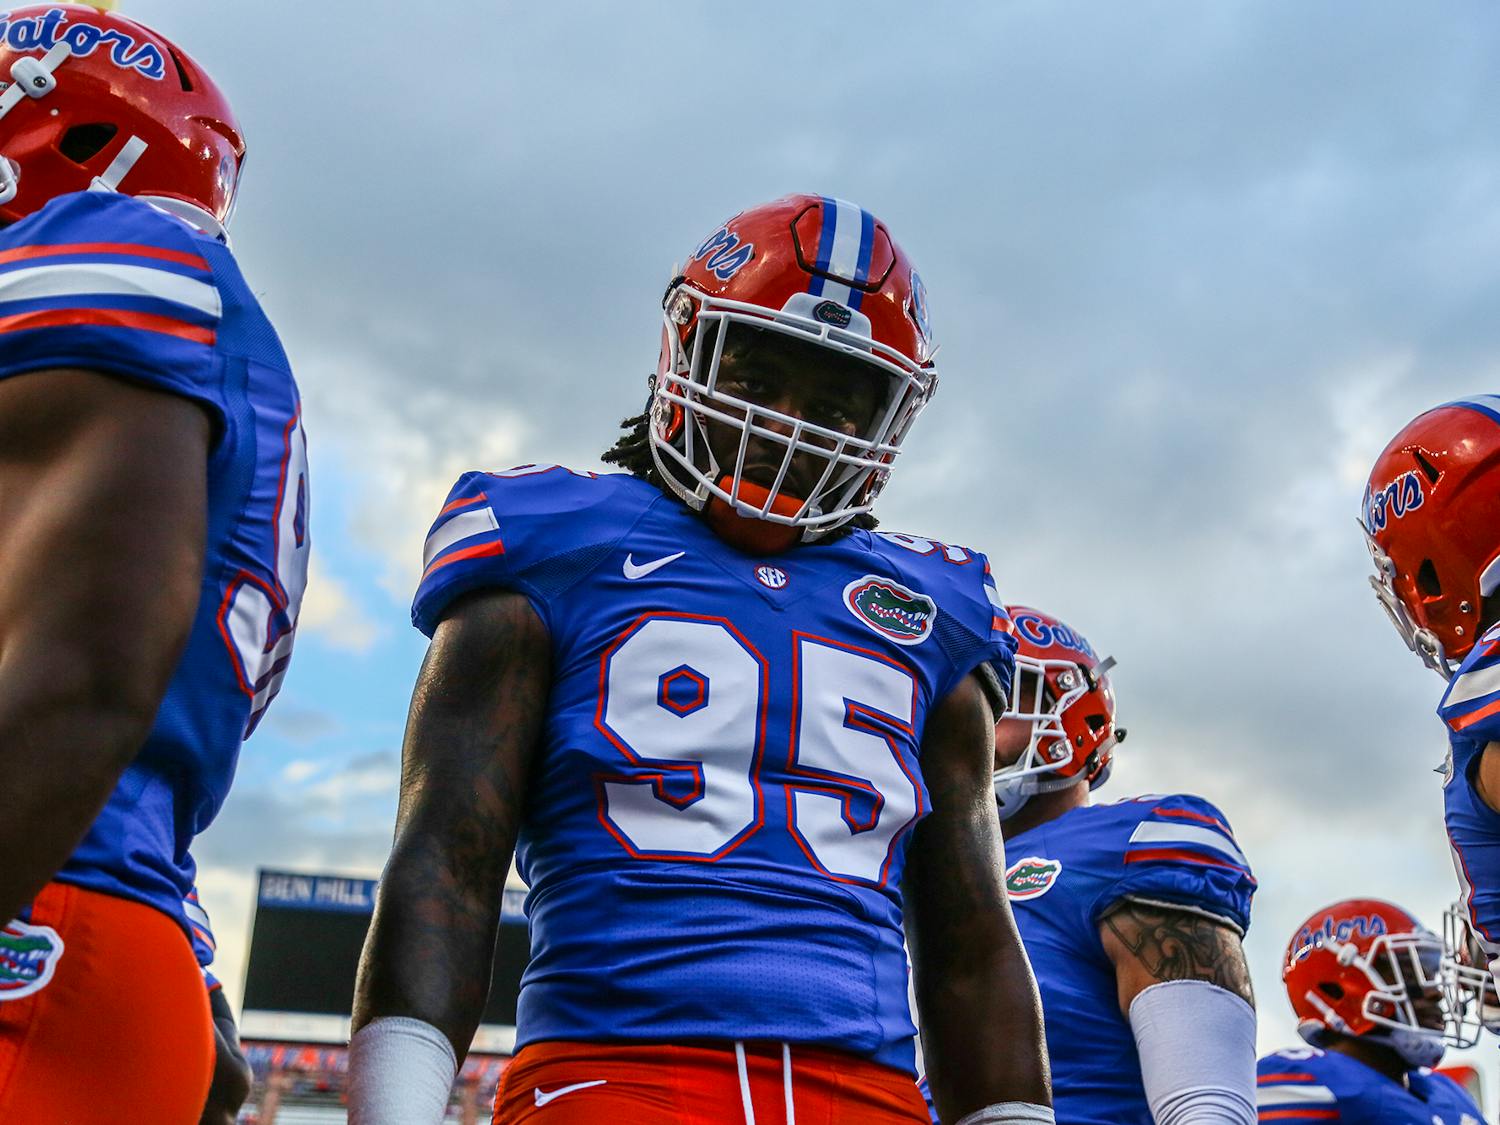 Florida defensive lineman Keivonnis Davis did not play in 2017 following an indefinite suspension from then-head coach Jim McElwain. 